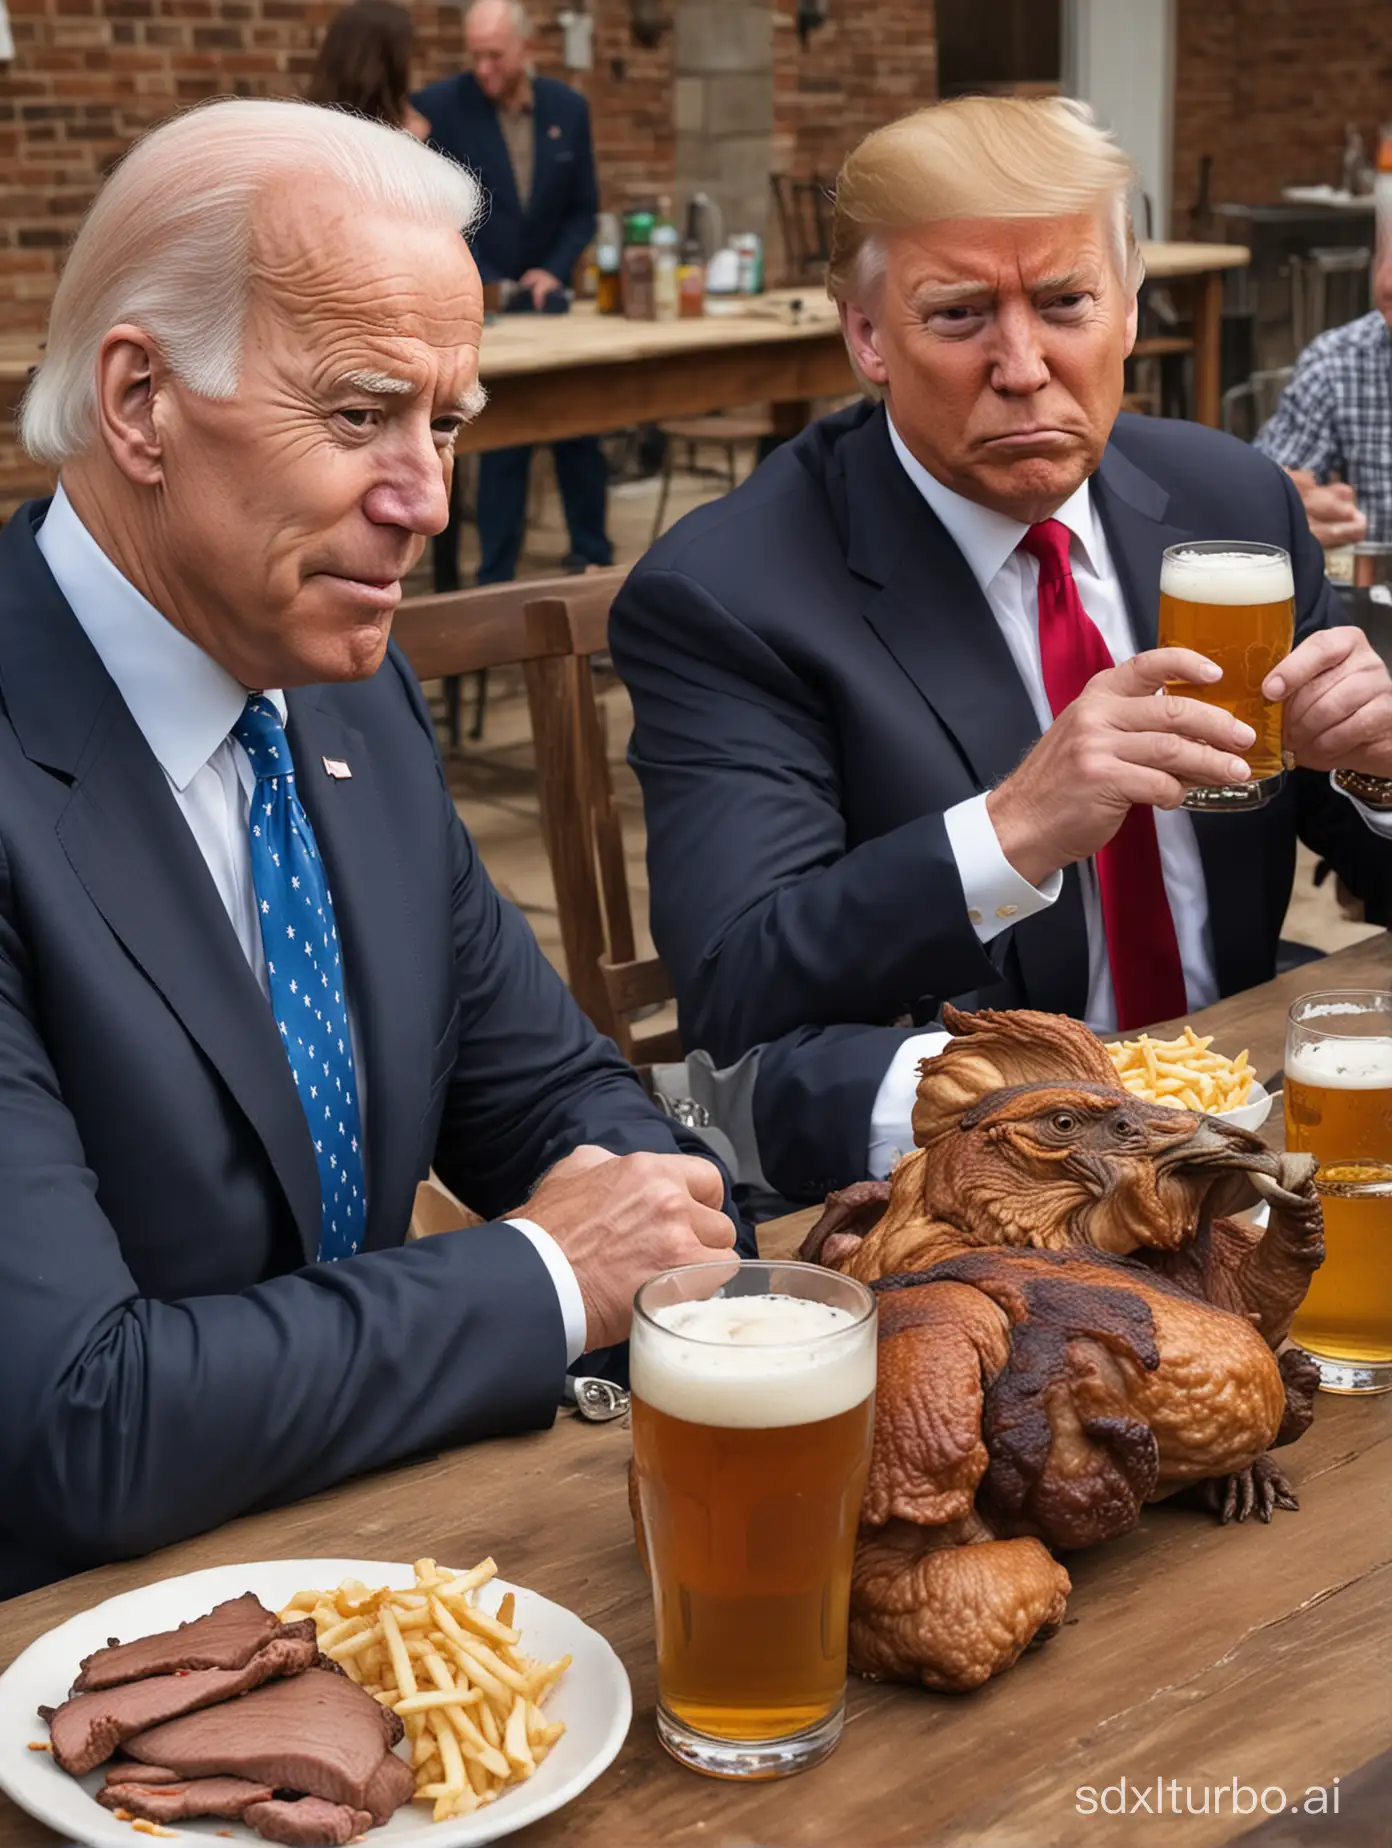 Joe Biden holding a beer sitting next to a grumpy looking Donald Trump both are sitting together drinking beer at a Texas barbeque while eating juicy steaks and Southern fried chicken.  Very realistic looking.